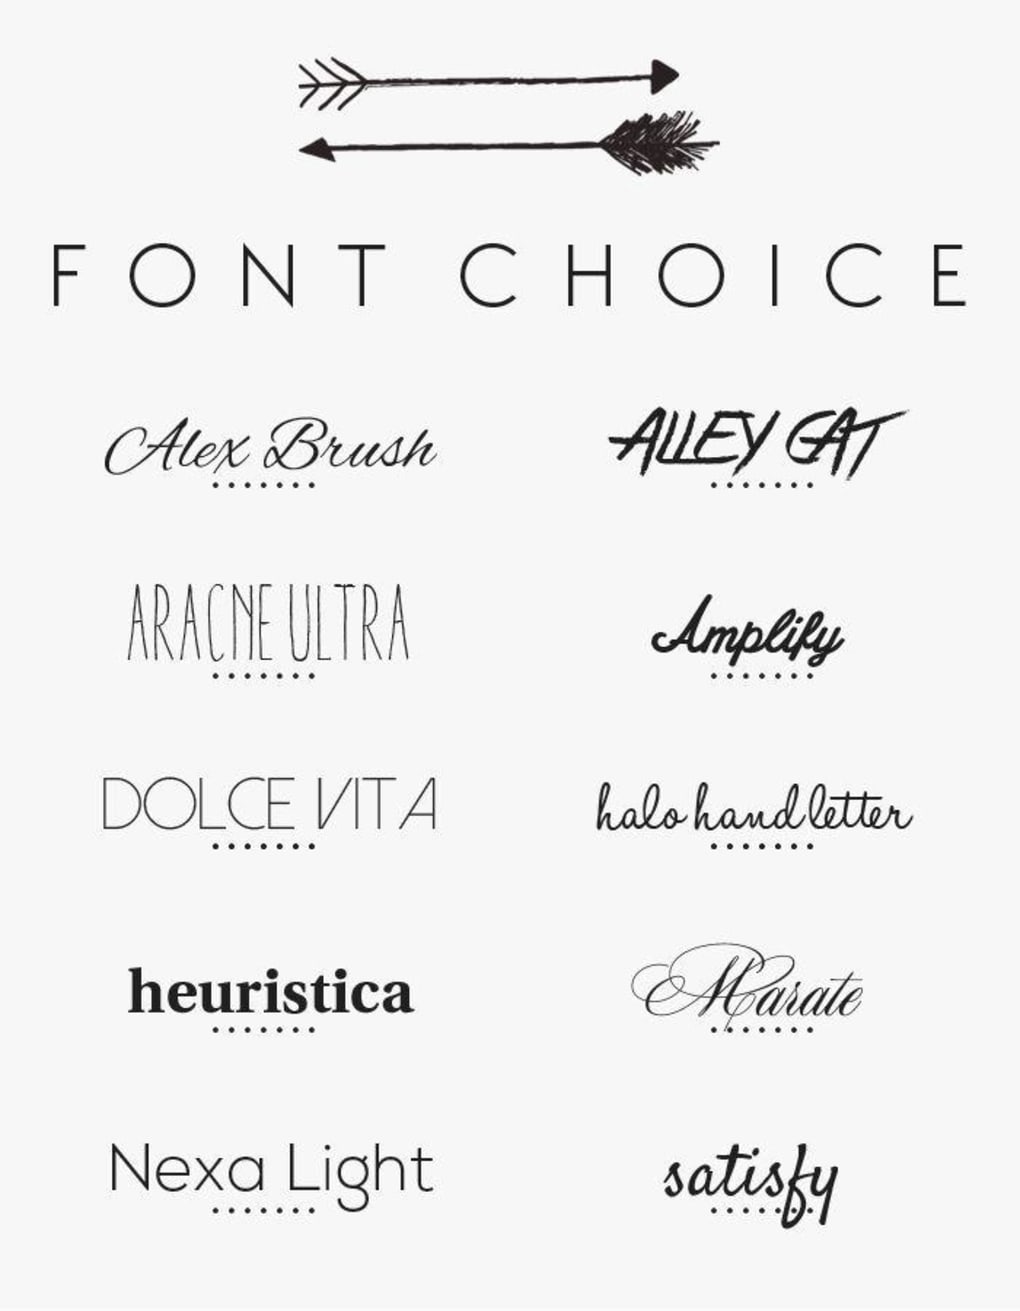 Tattoo Fonts and Tattoo Lettering for Your New Tattoo | Tattoo lettering,  Trendy tattoos, Tattoo fonts